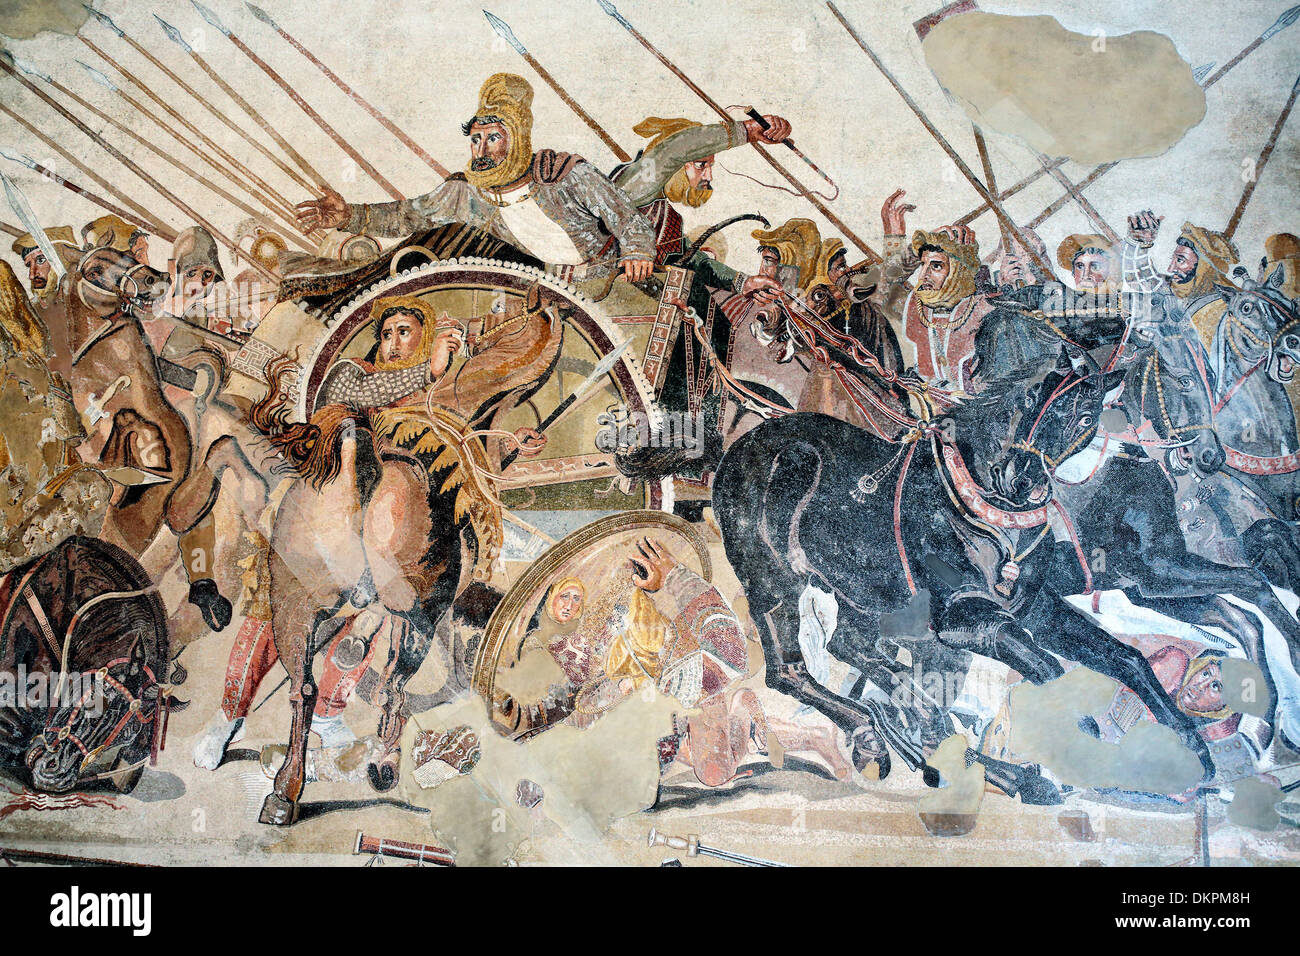 Battle between Alexander and Darius from Pompeii (120 BC), Mosaic, National Archaeological Museum, Naples, Campania, Italy Stock Photo